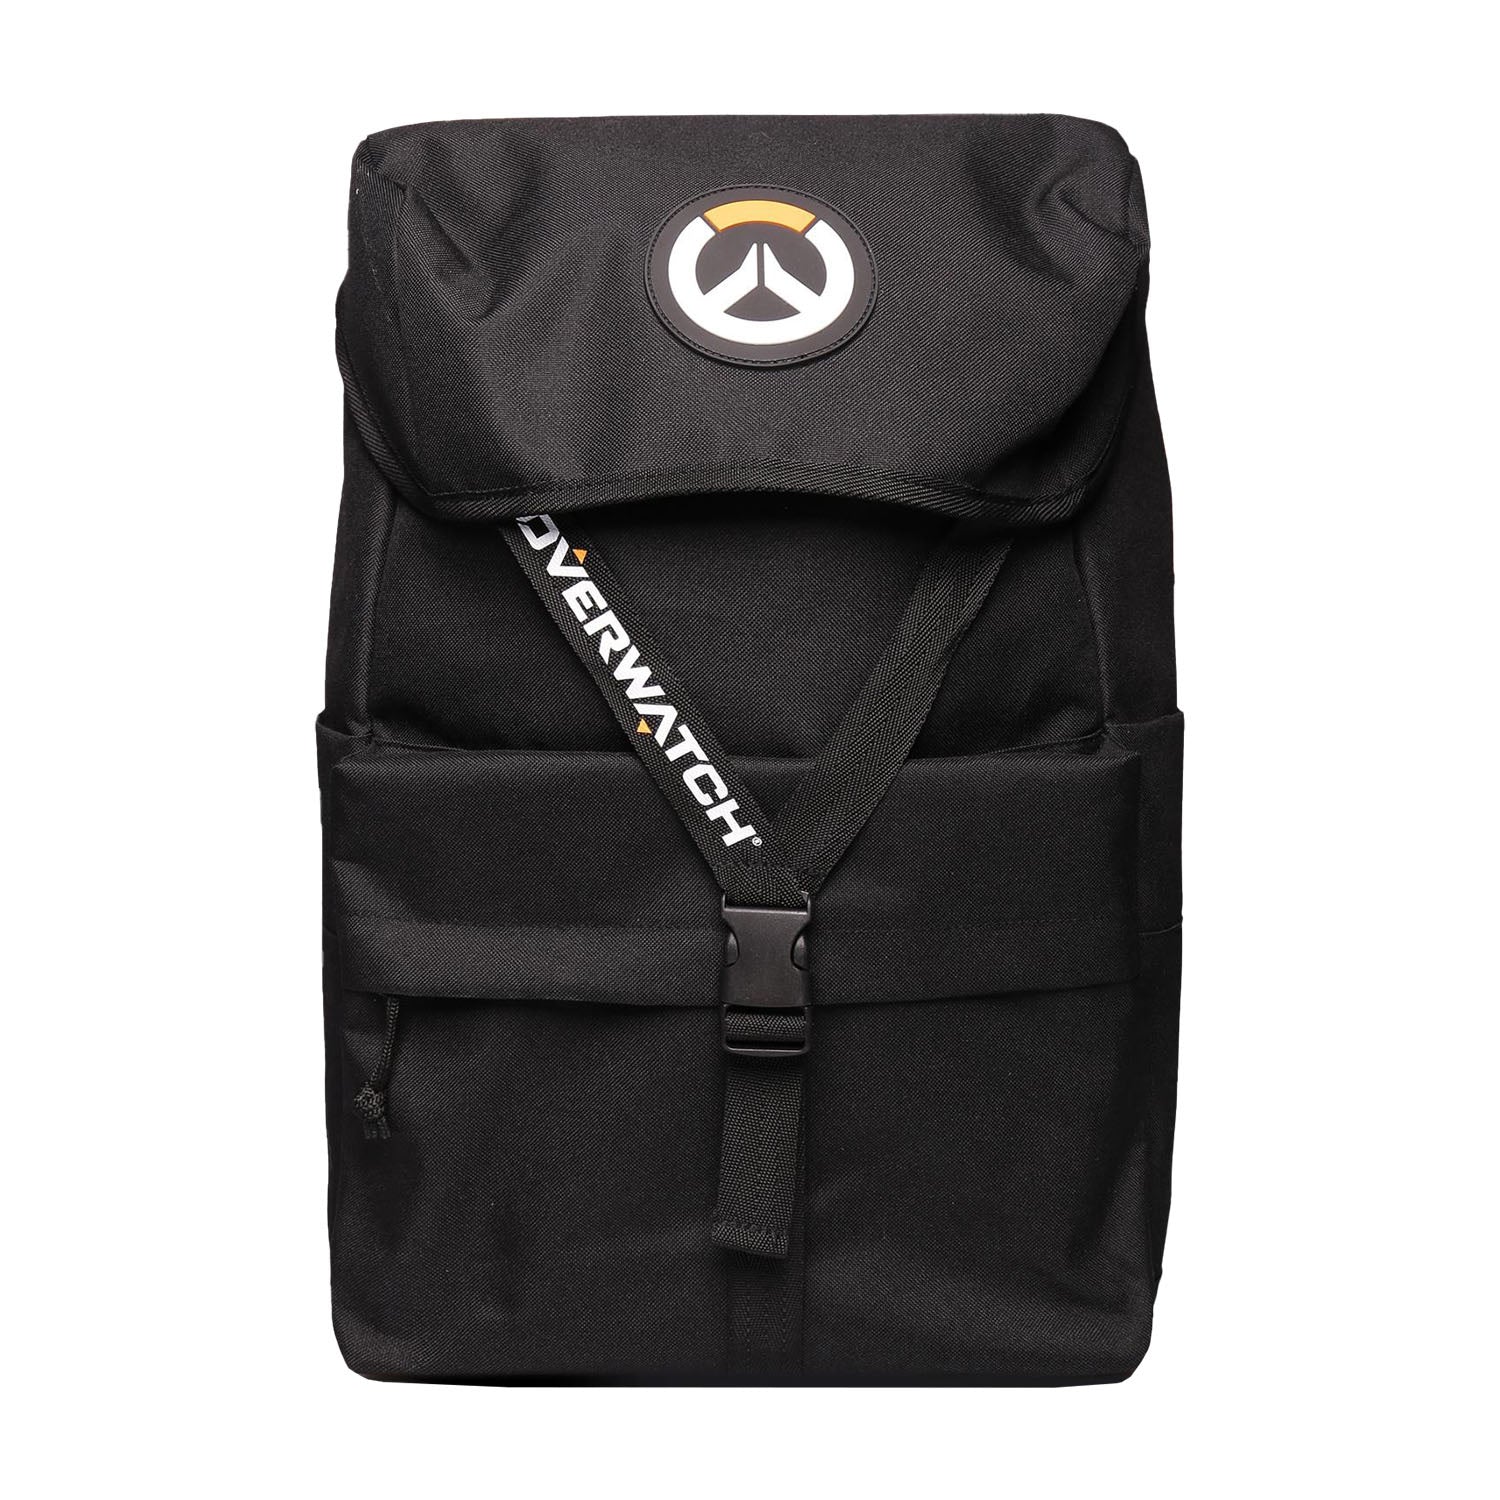 Overwatch Black Strap Backpack - Front View